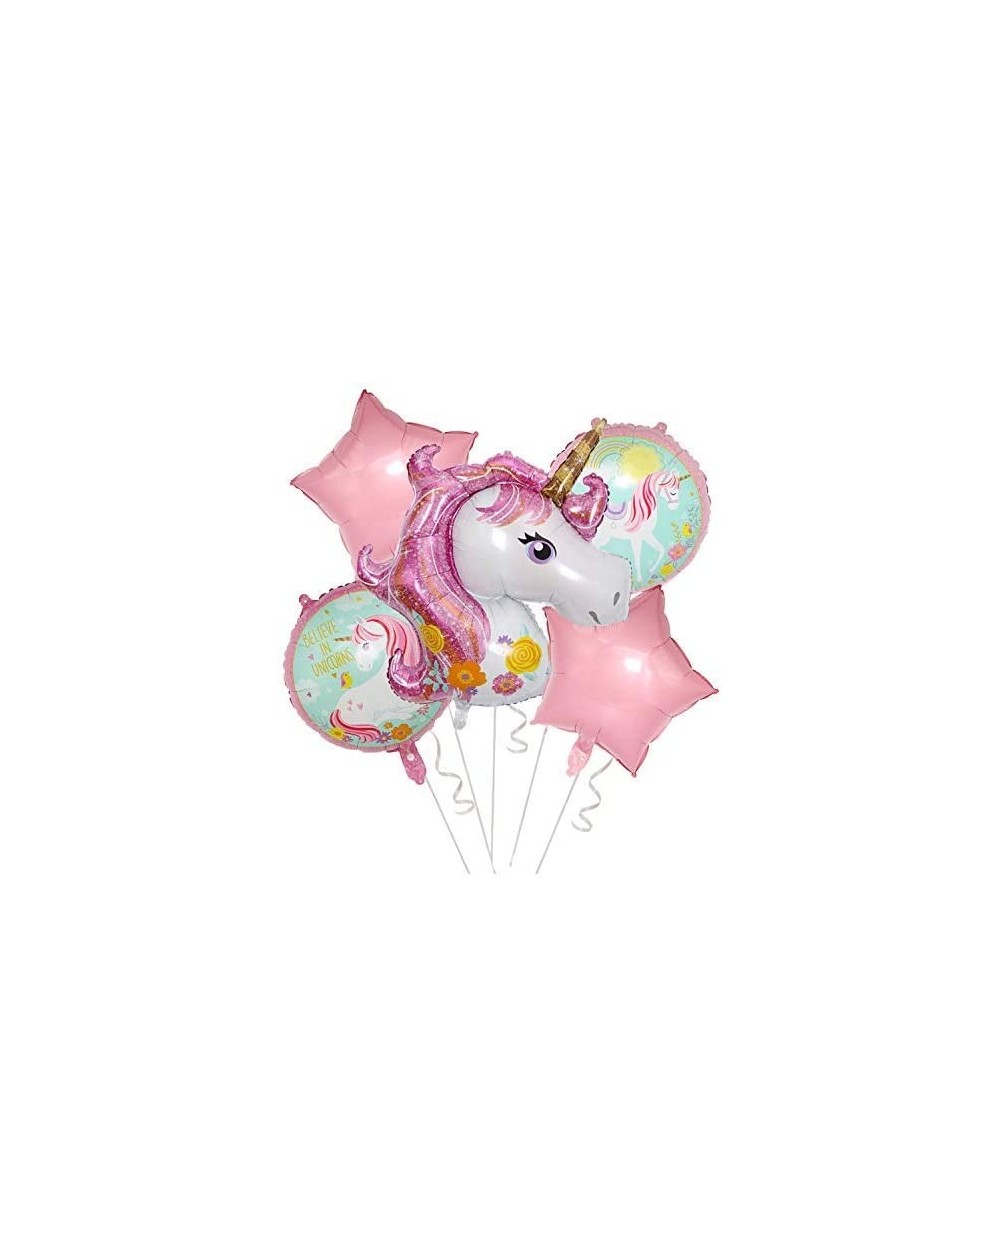 Balloons Magical Unicorn Bouquet of Balloons- Unicorn Party Decorations Party Supplies Pink Balloons - Unicorn Theme Party Pa...